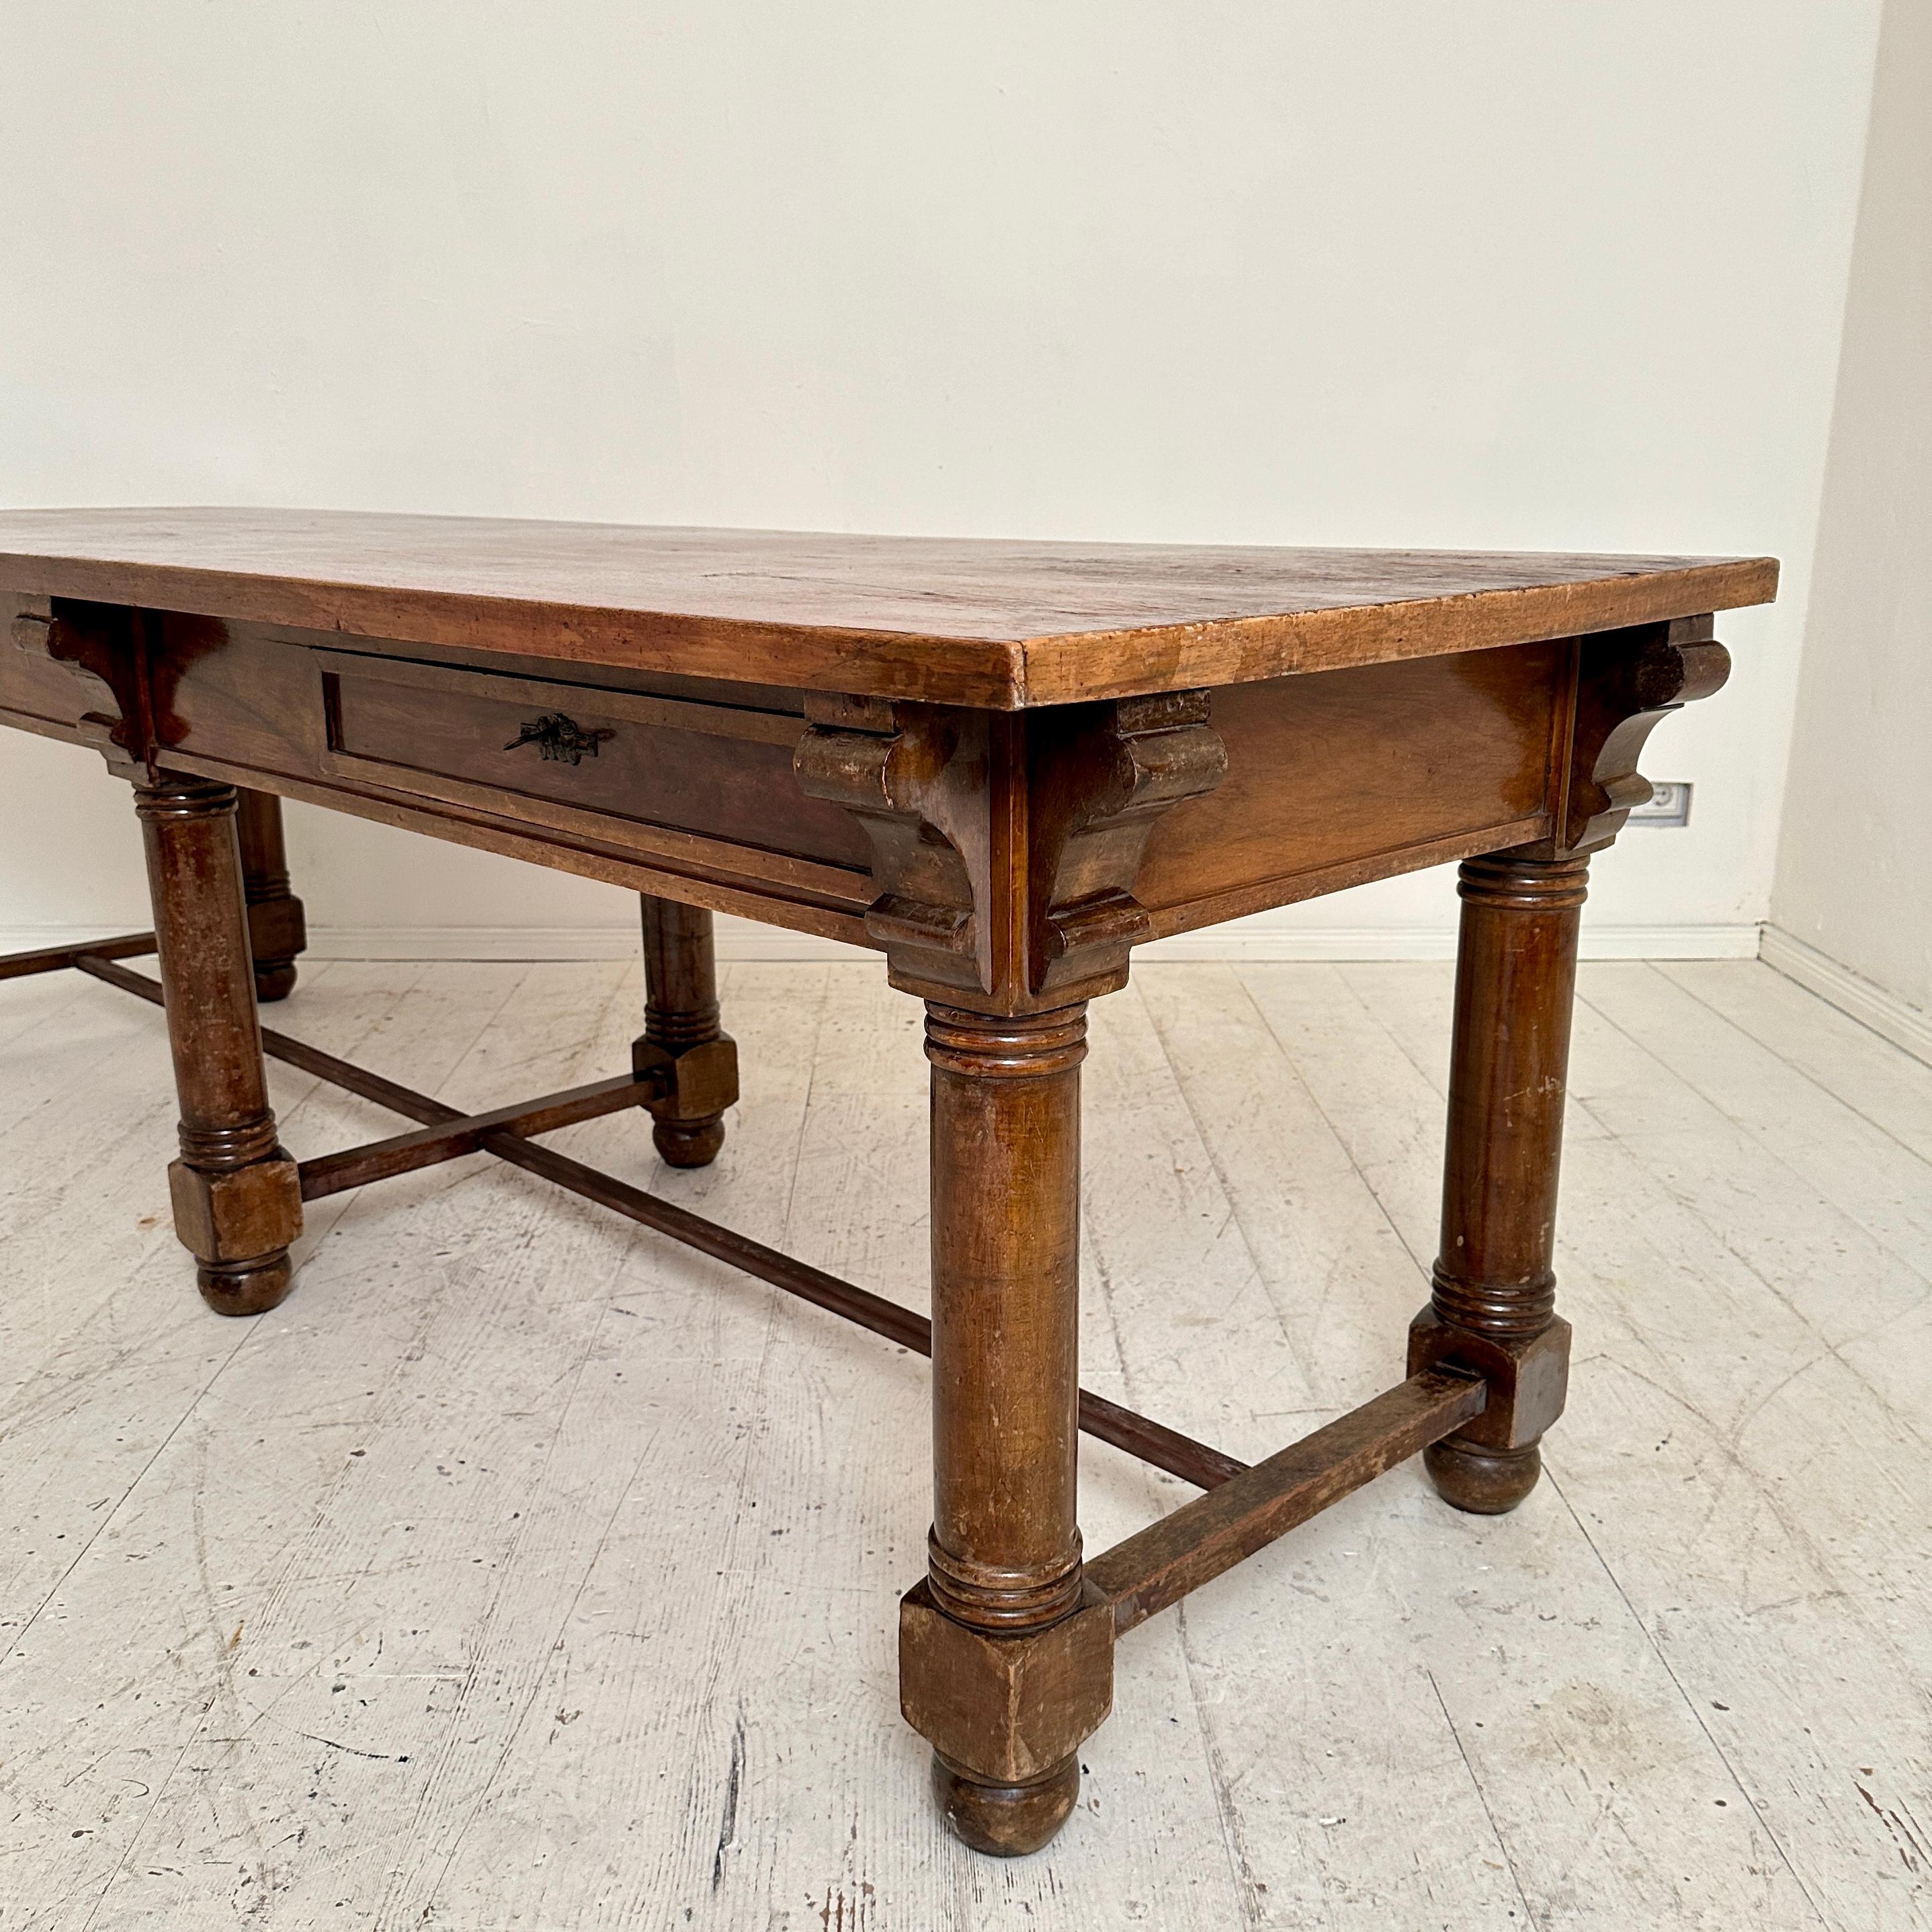 Late 19th Century Italian Large Brown Walnut Dining Table with 2 Drawers, 1880 For Sale 10